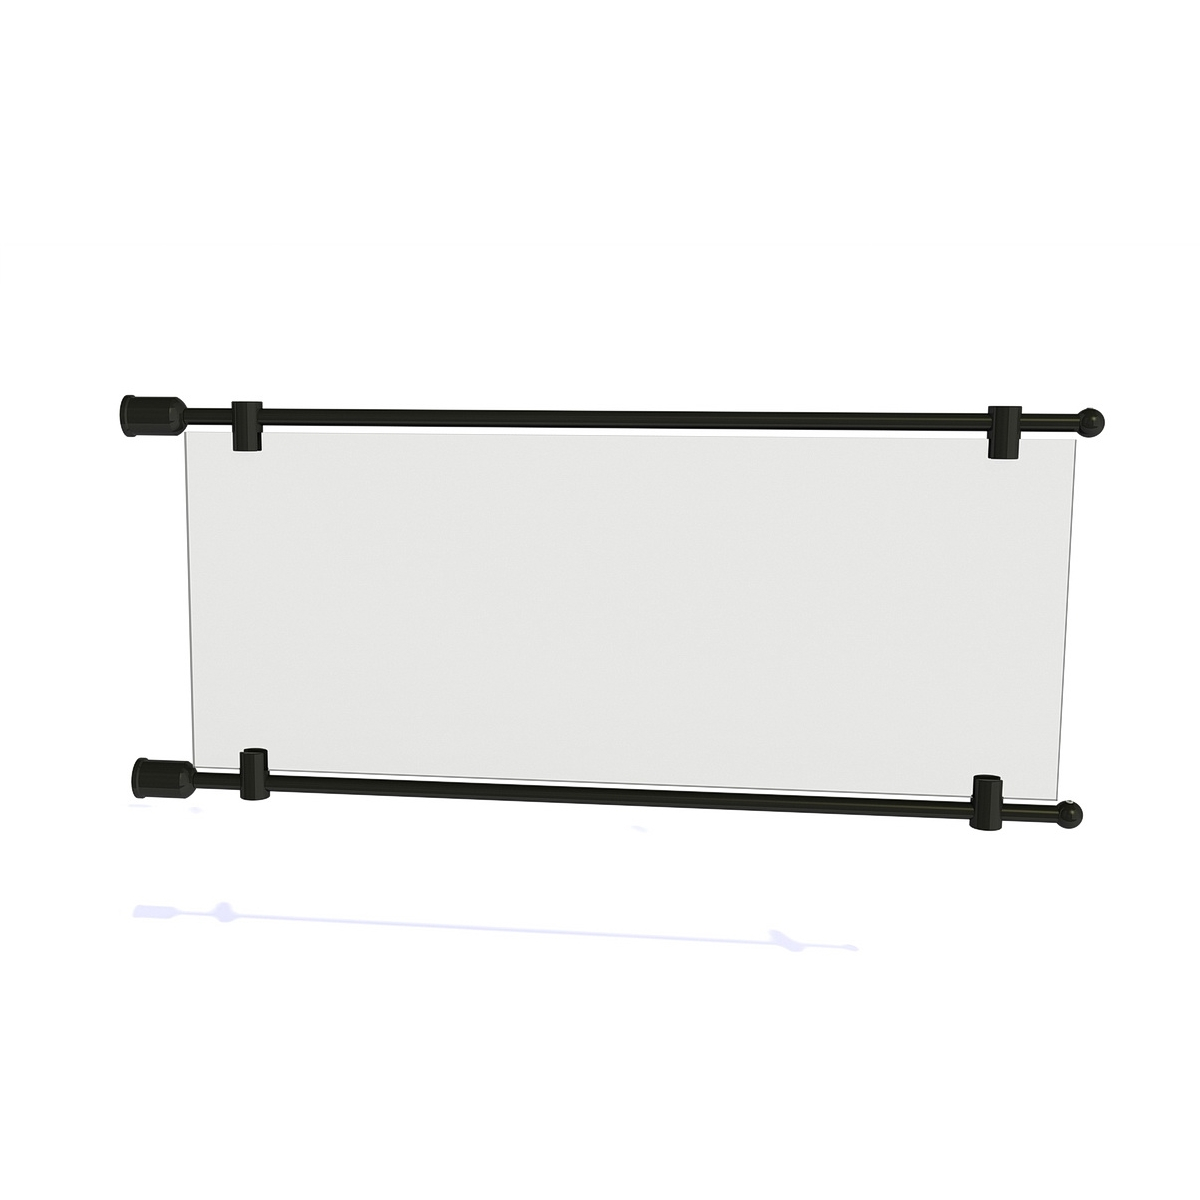 Set of 2, 3/8'' Diameter Rod Projecting Sign, Aluminum Black Matte Anodized , 21 13/16”. Material thickness up to 5/16”